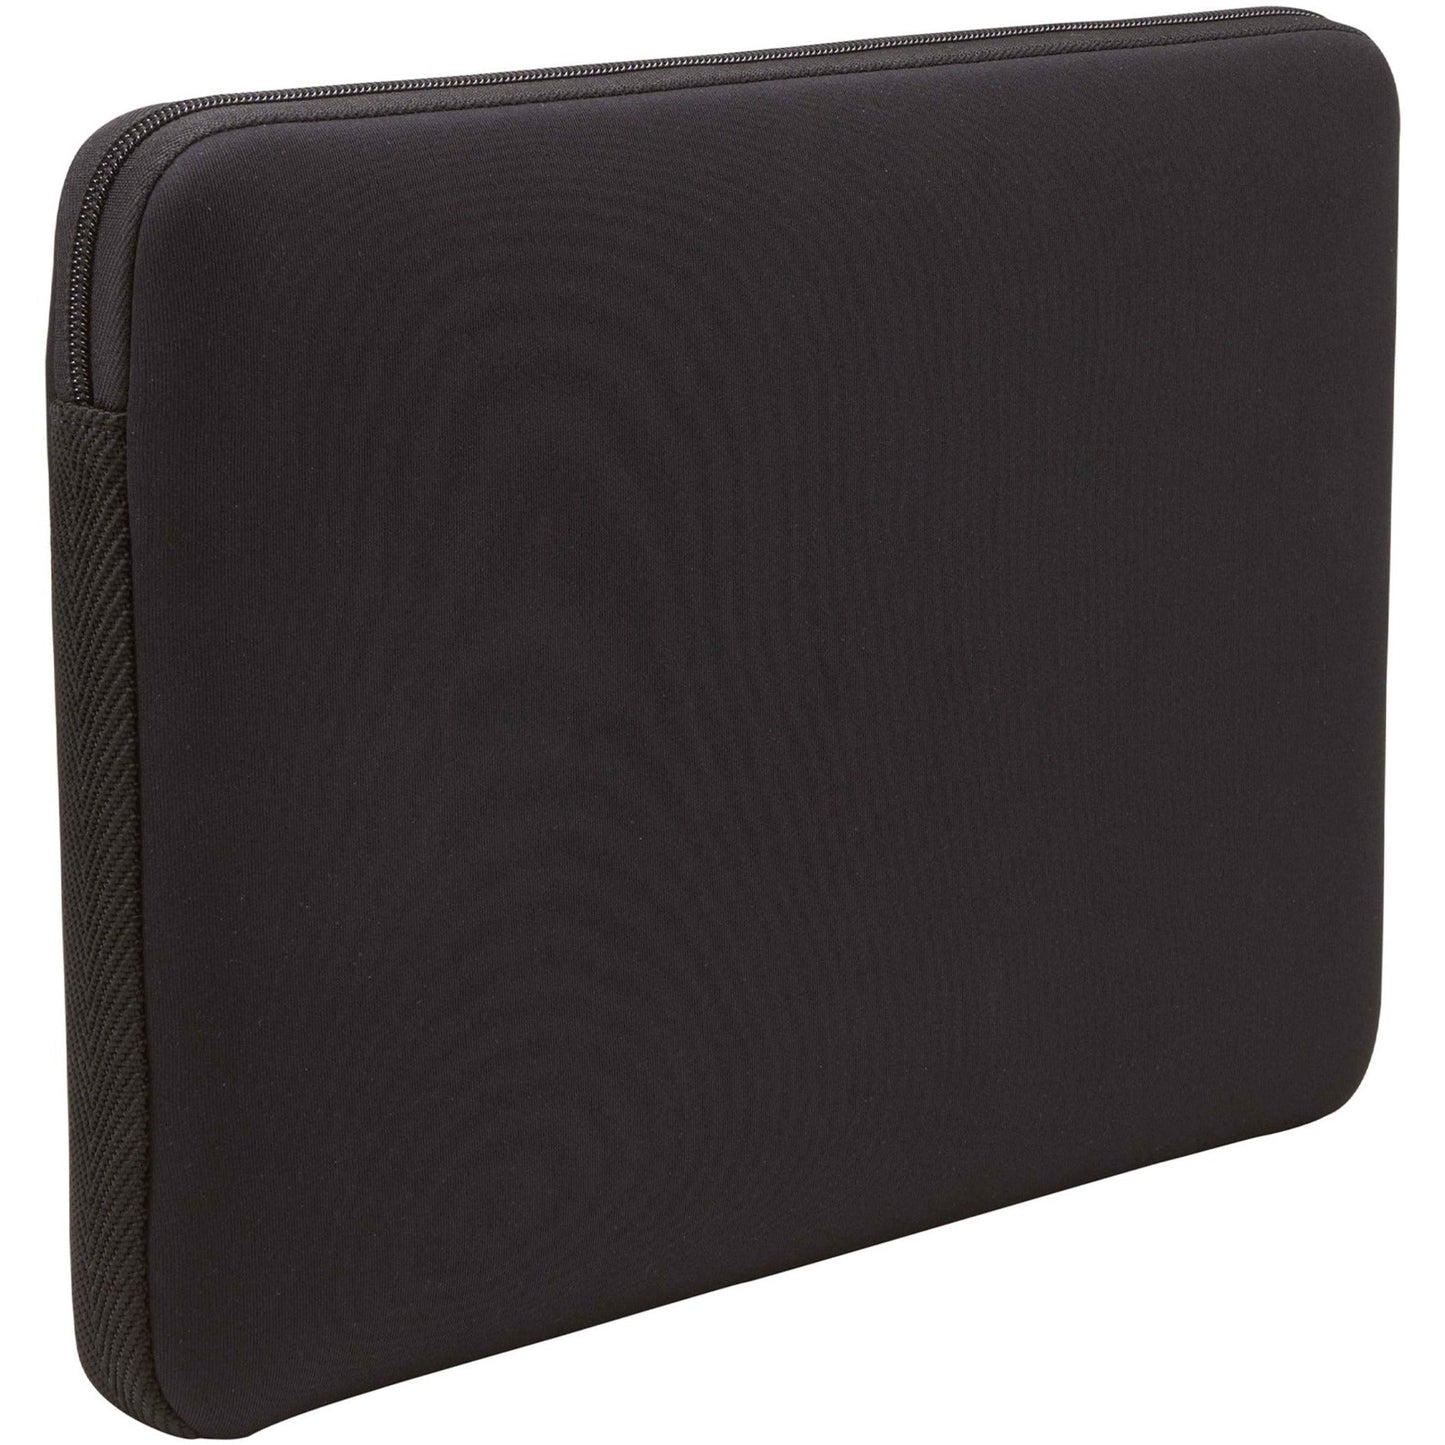 Case Logic LAPS-111 Carrying Case (Sleeve) for 10" to 11.6" Chromebook Ultrabook - Black